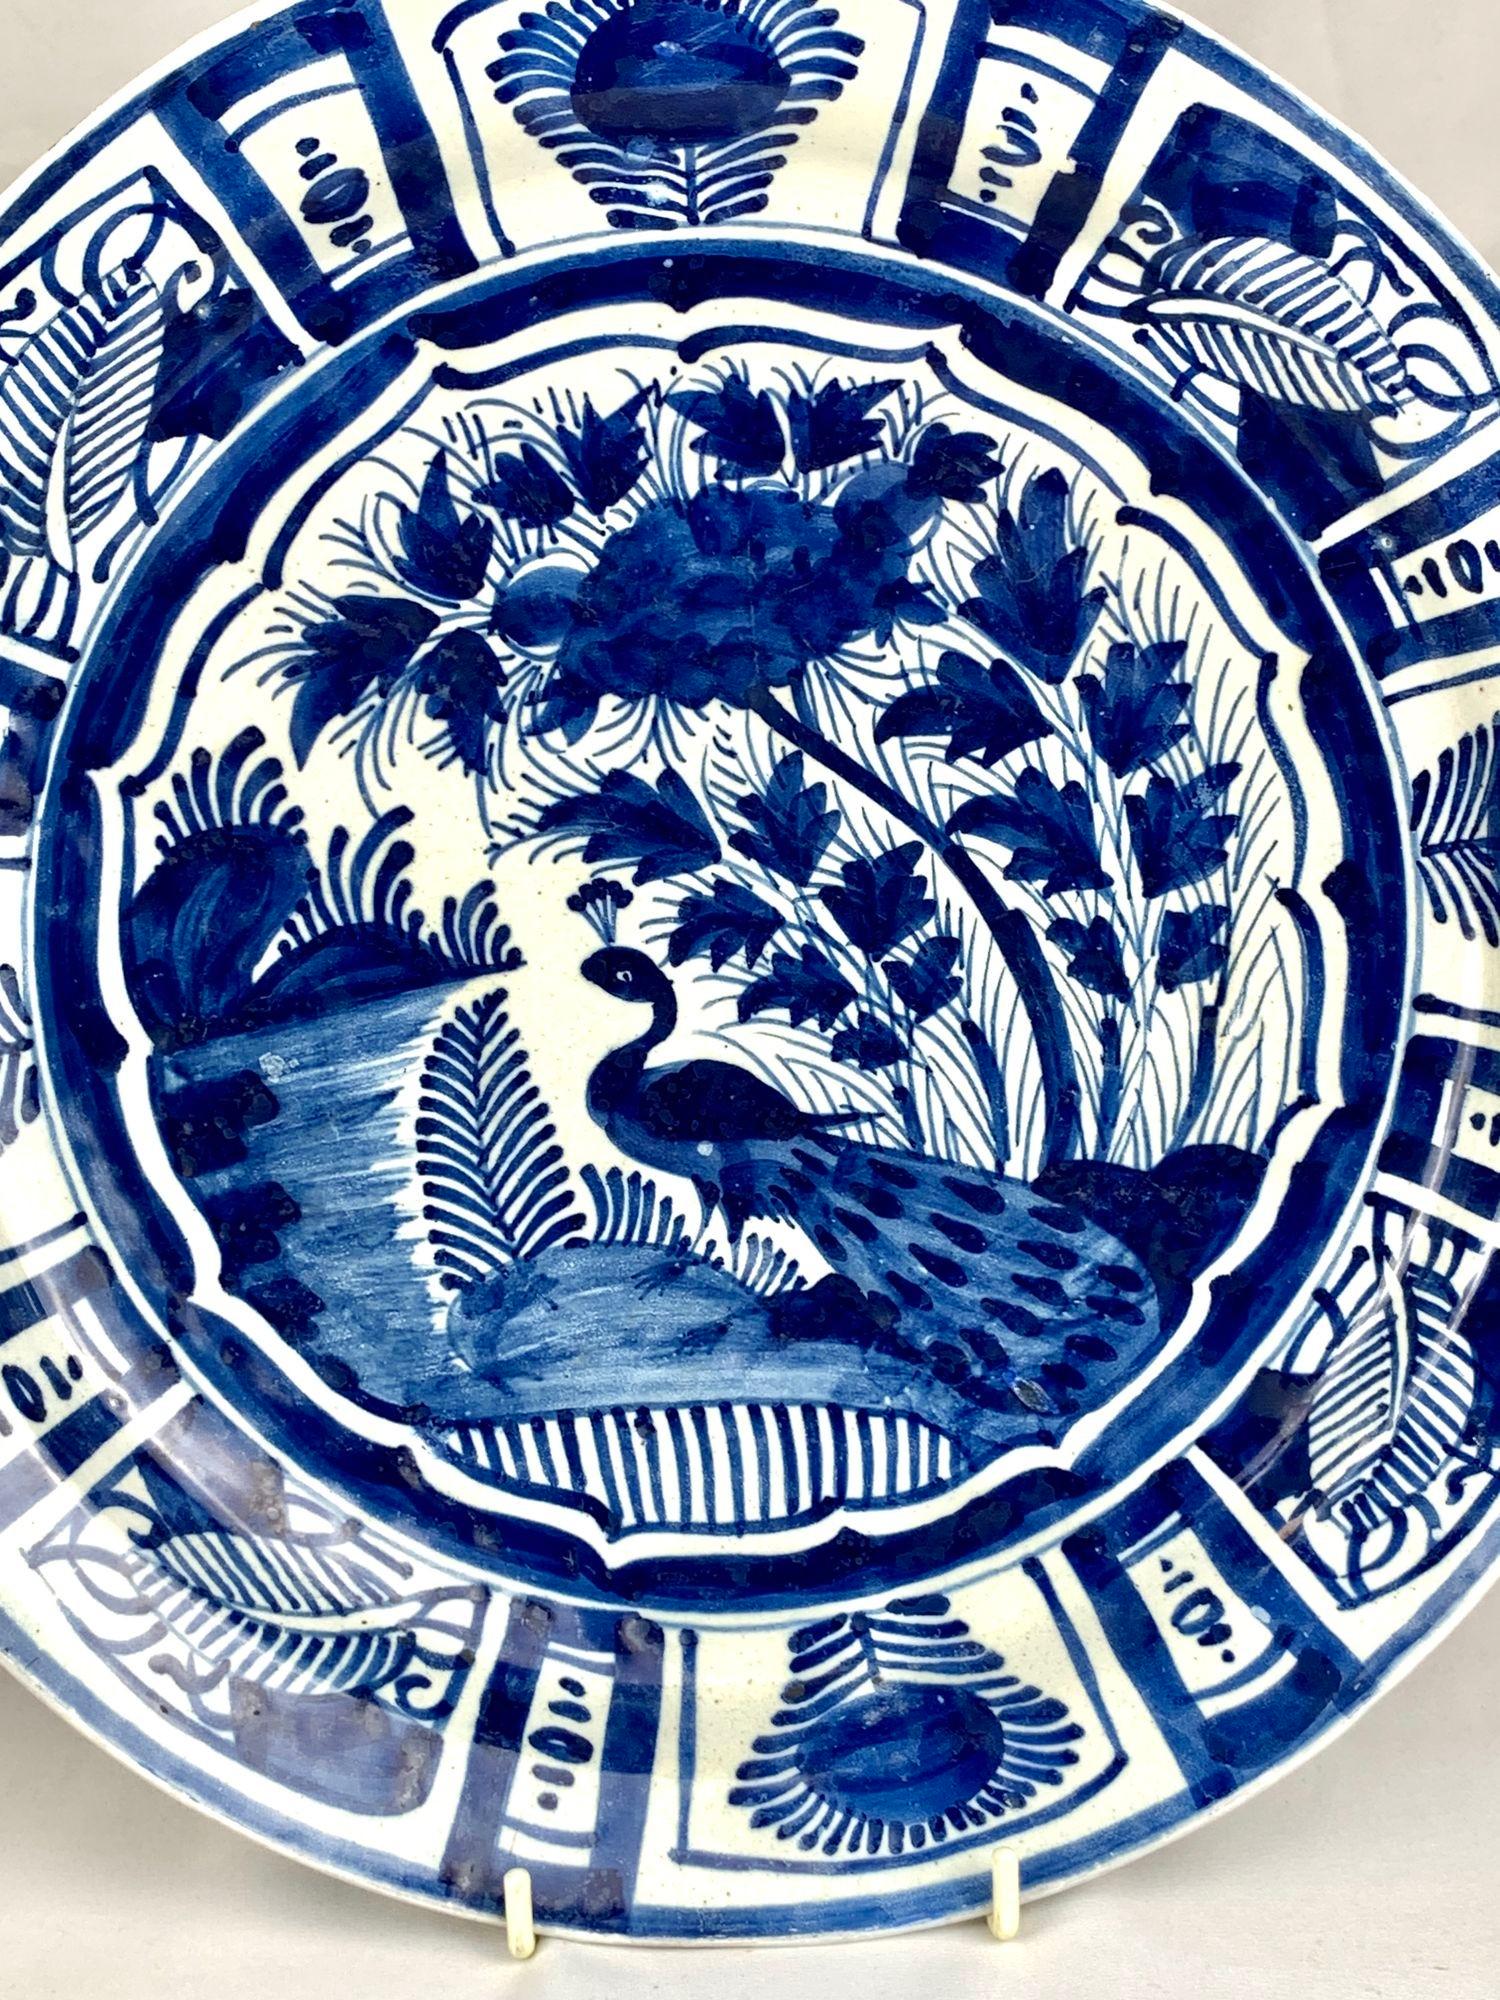 This mid-18th-century Dutch Delft charger is handpainted in several shades of cobalt blue.
The viewer is drawn to the lovely scene in the center, which shows an elegant peacock in a flowery garden near water.
The wide rim has eight panels, each with